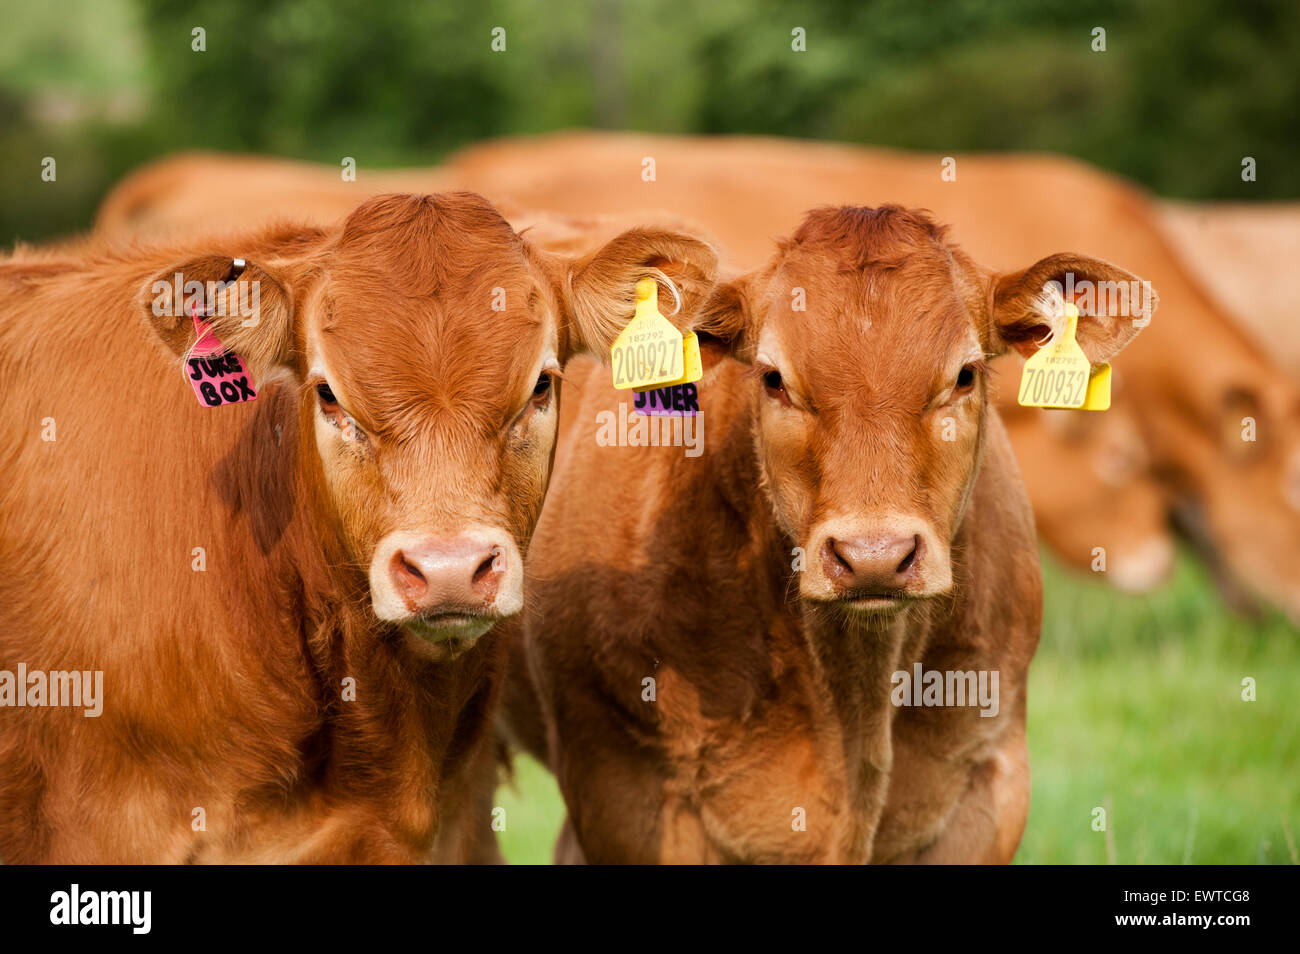 Herd of Limousin beef cattle in upland pastures, Lancashire, UK. Stock Photo